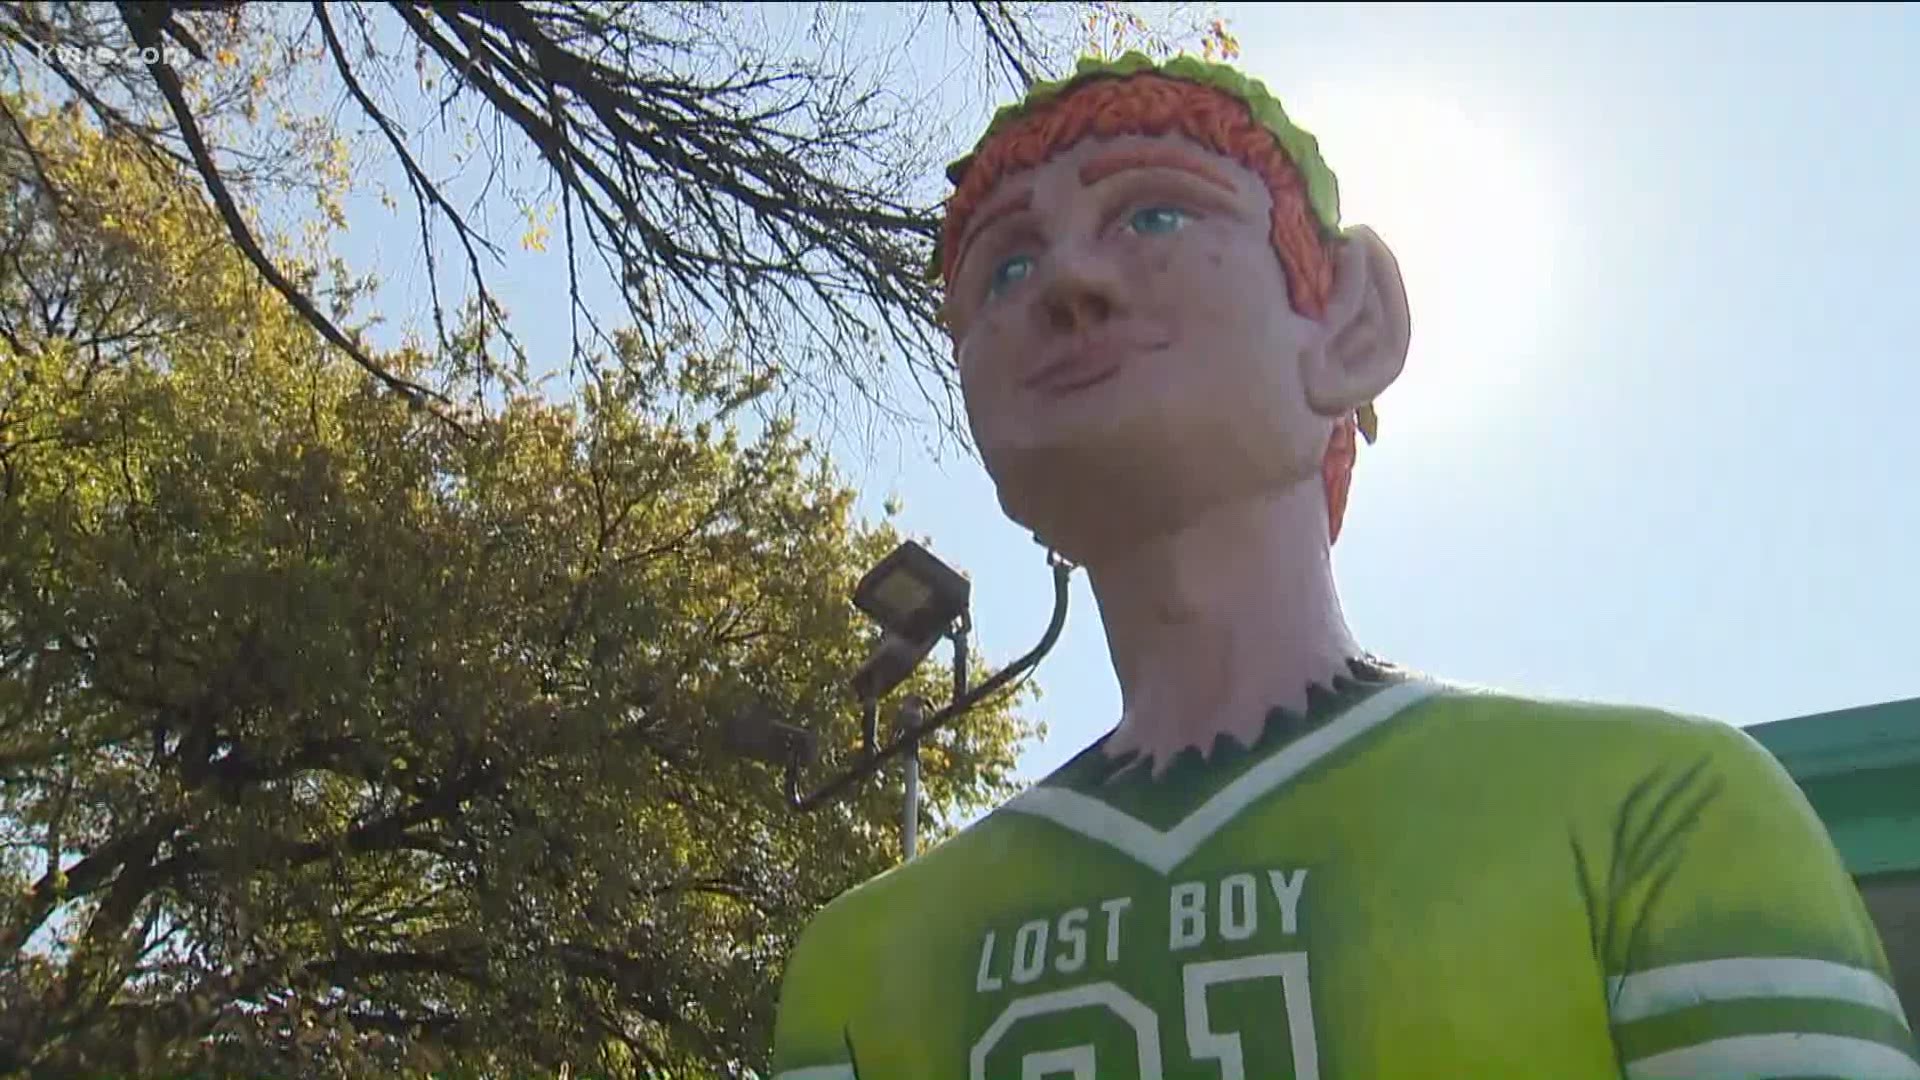 In this installment of Keep Austin Local, Cultural Reporter Brittany Flowers stopped by Peter Pan Mini-Golf.